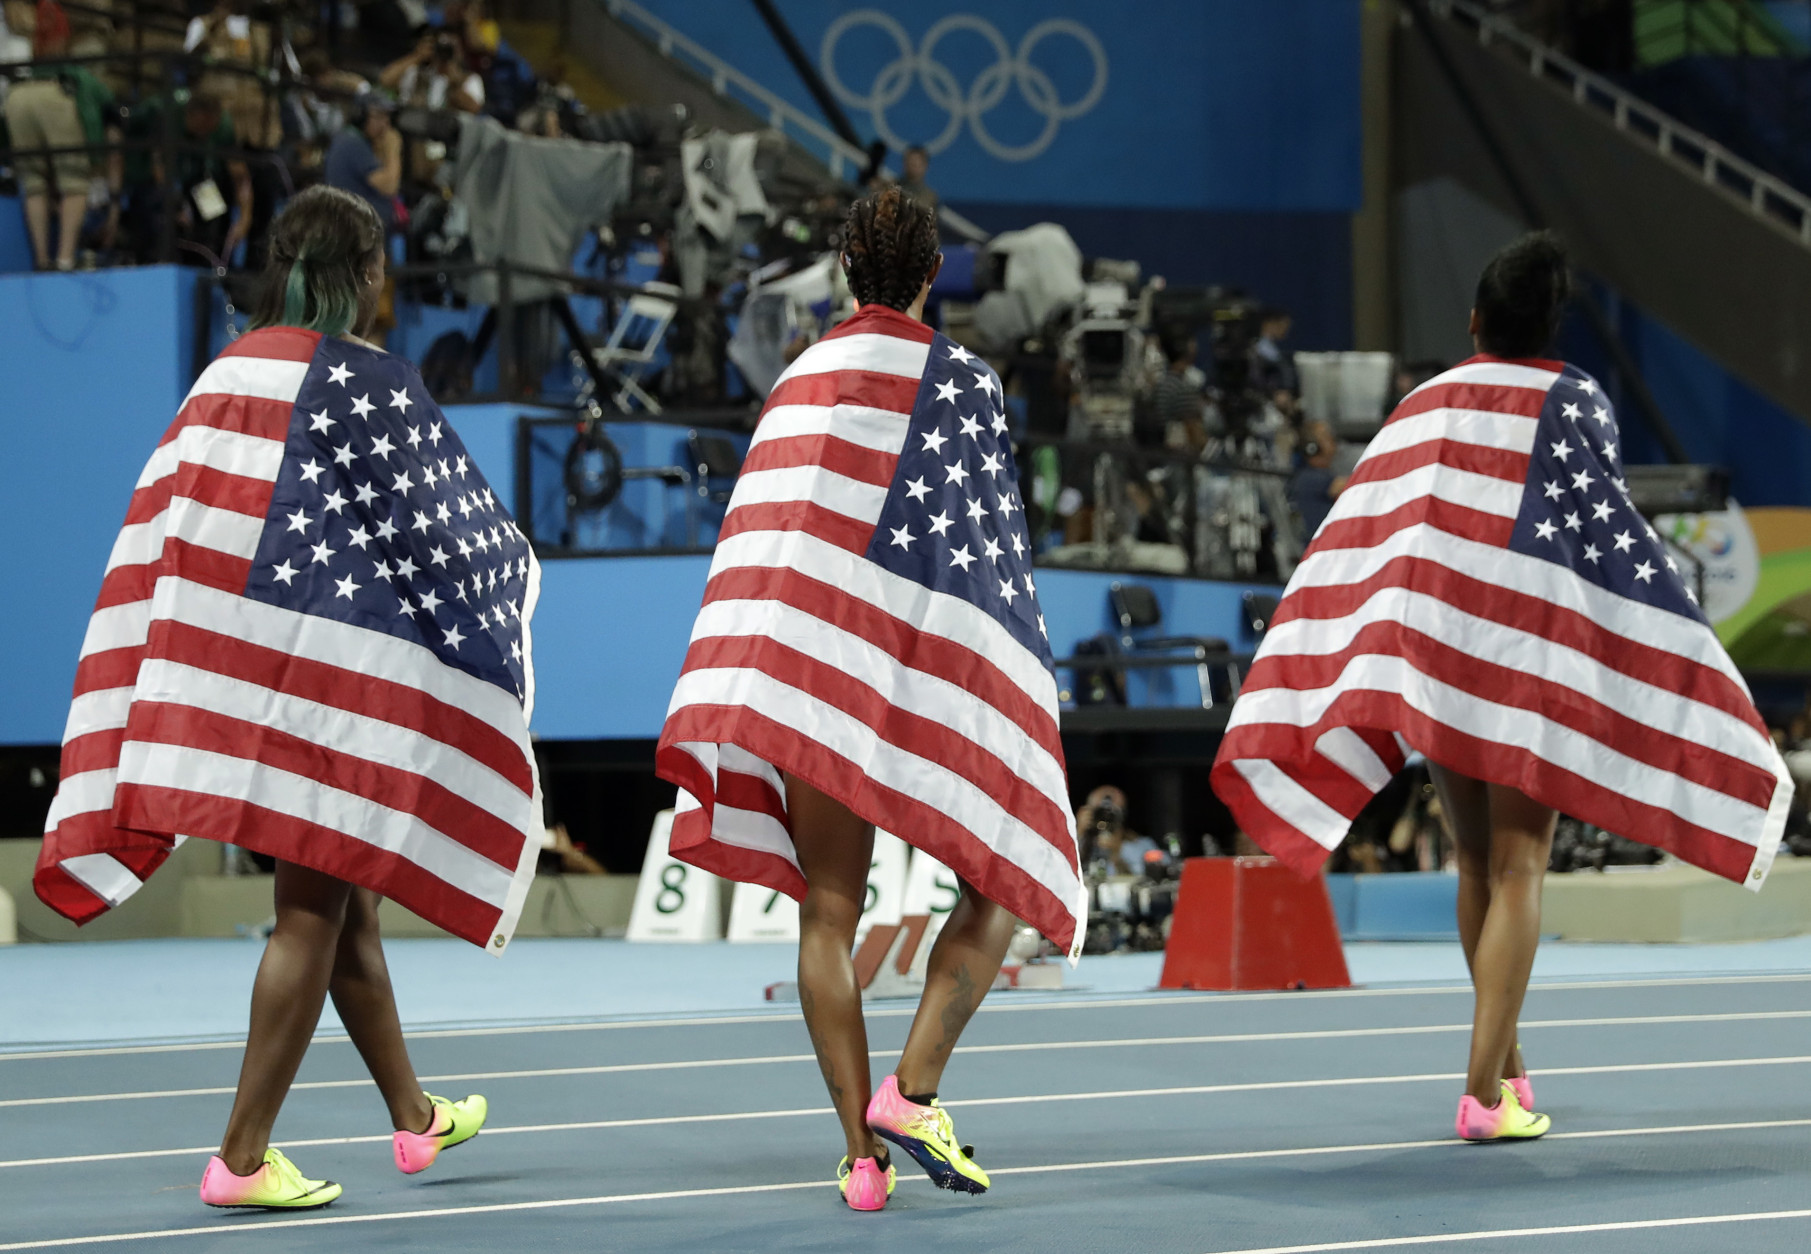 Gold medal winner Brianna Rollins, center, silver medal winner, Nia Ali, left , and bronze medal winner Kristi Castlin, all from the United States, pose with their country's flag after the 100-meter hurdles final, during the athletics competitions of the 2016 Summer Olympics at the Olympic stadium in Rio de Janeiro, Brazil, Wednesday, Aug. 17, 2016. (AP Photo/Matt Dunham)